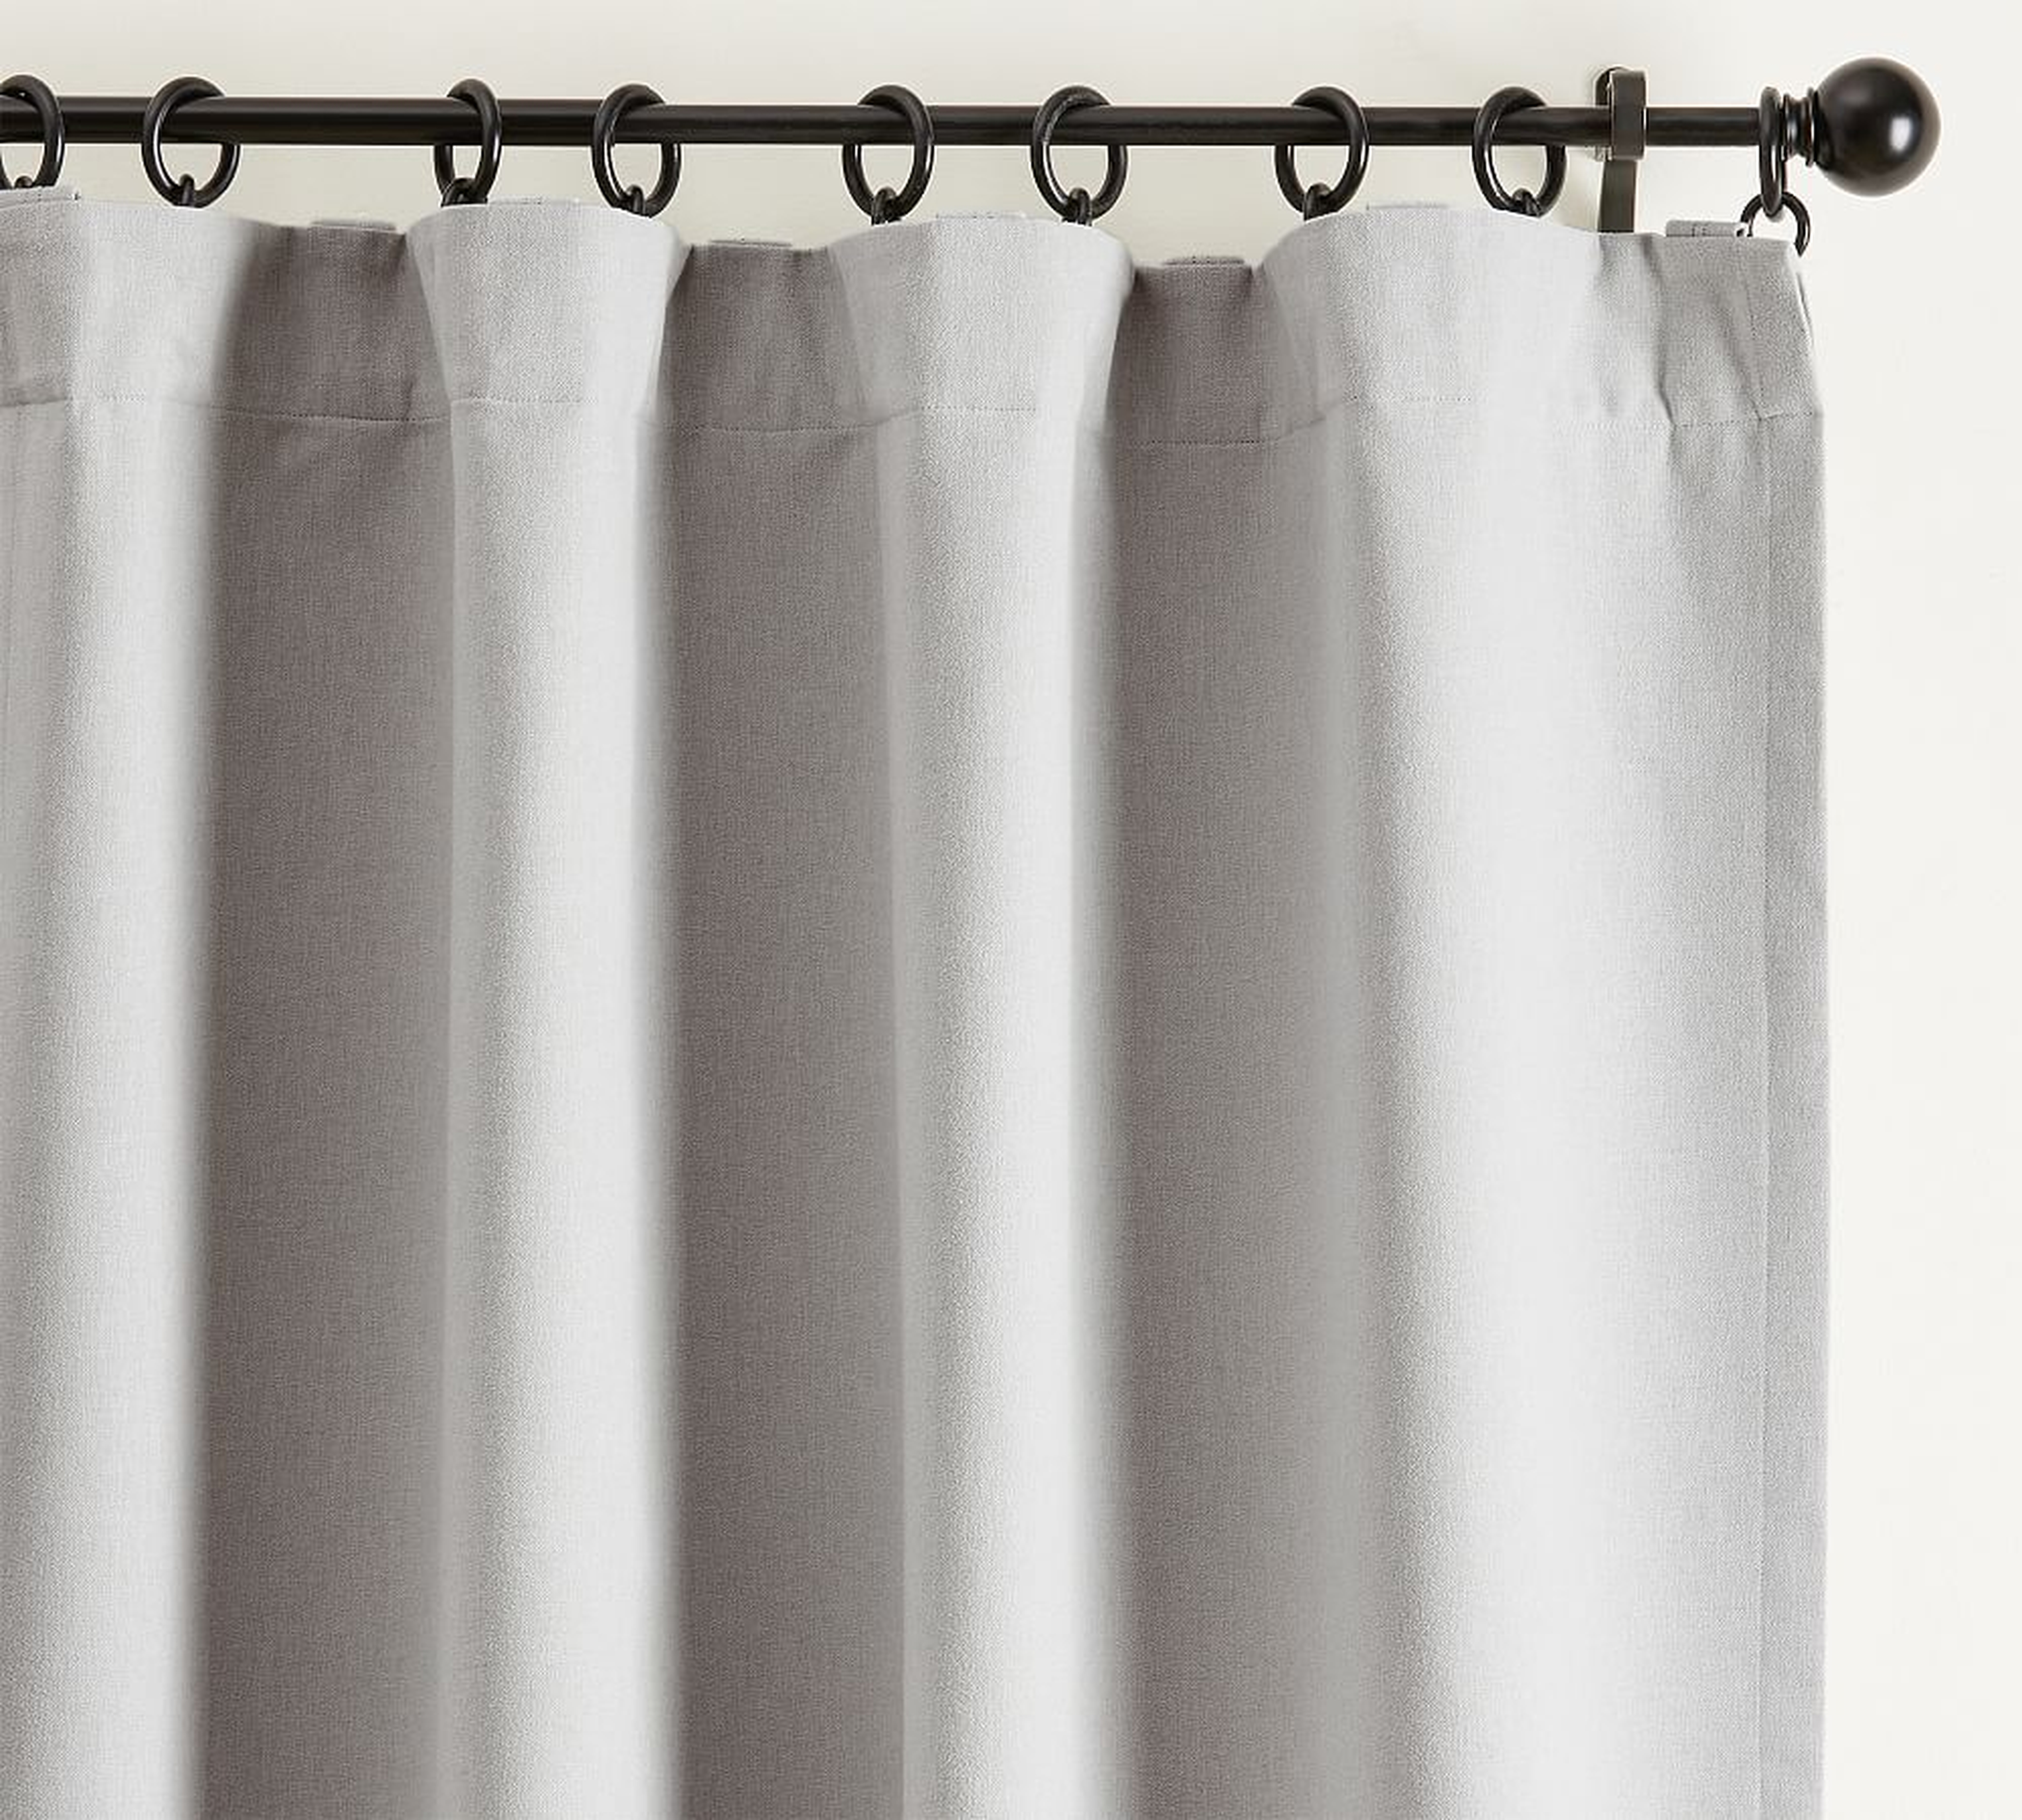 Peace & Quiet Noise-Reducing Blackout Curtain, Light Gray , 50 x 108" - Pottery Barn